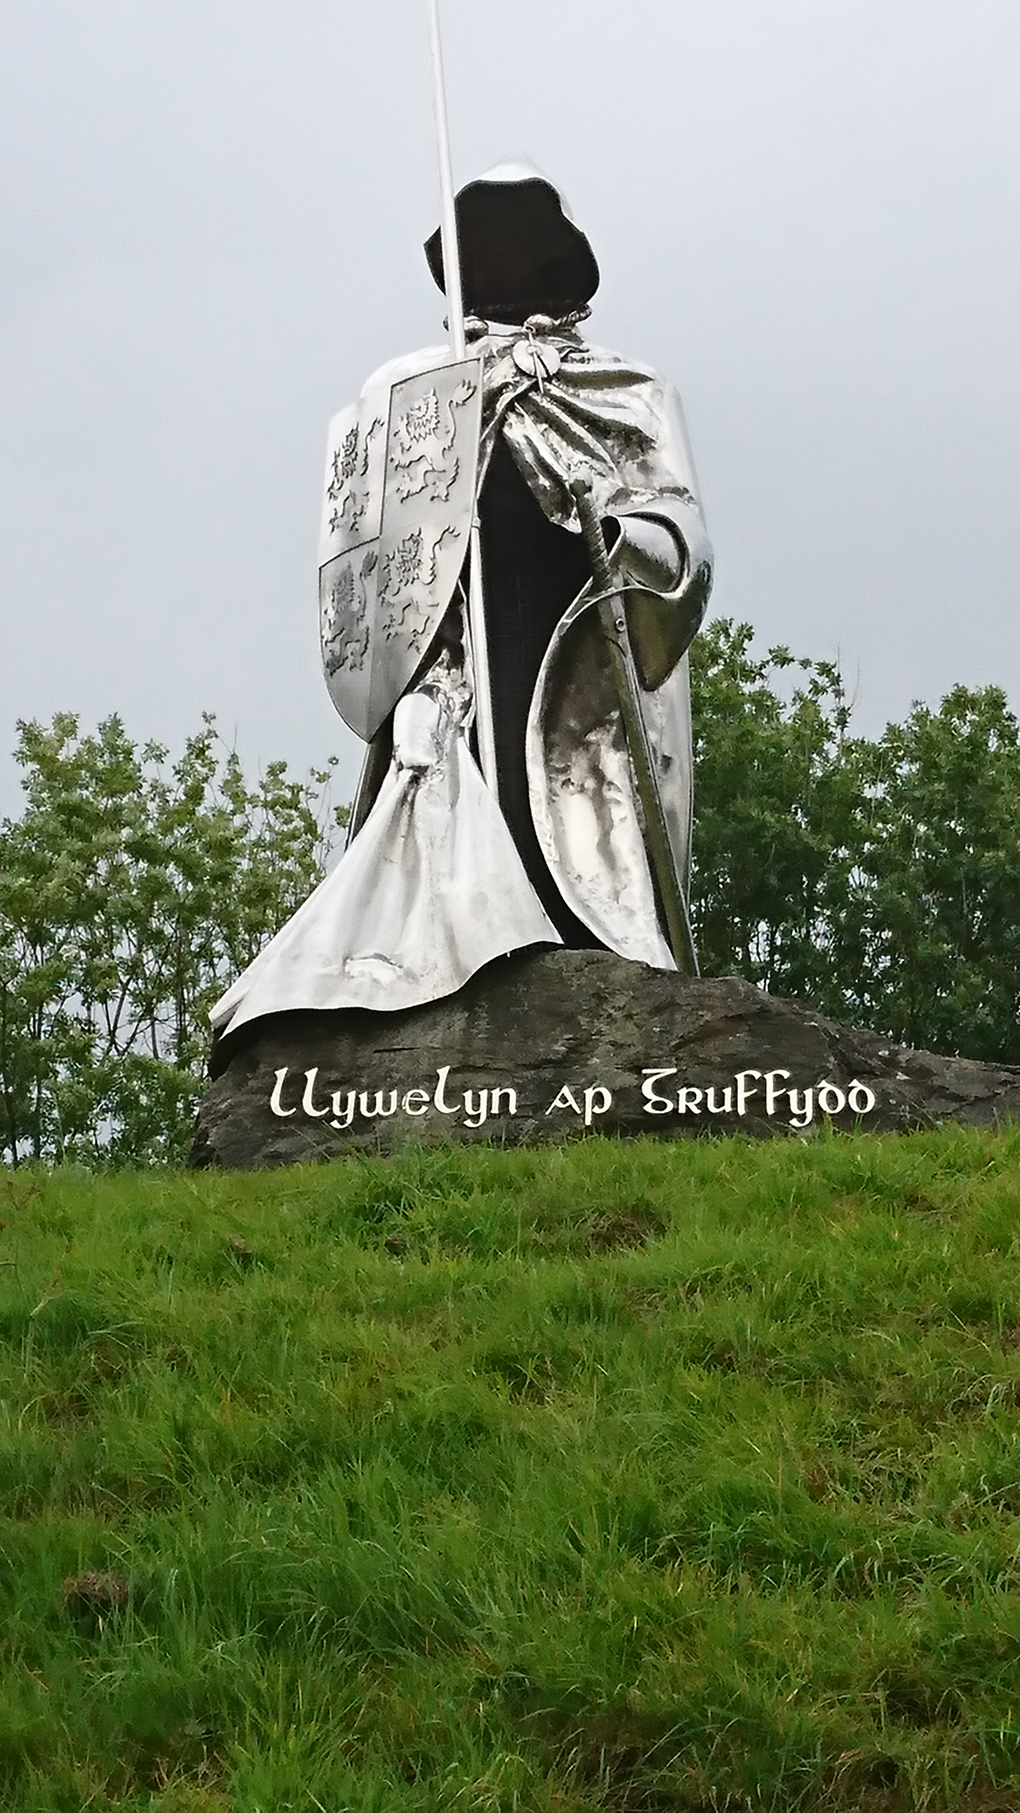 An impressive and rather spooky statue of Llewelyn ap Gruffydd Fychan, born in 1300’s , became a rich landowner who helped Prince Owain Glyndwr to escape during the guerilla warfare’s against King Henry IV . Llewelyn was hanged, drawn and quartered by Henry. His pickled body parts were exhibited in various Welsh towns as a deterrent to his fellow countrymen from joining the guerilla warfare against Henry. Llewelyn met his gruesome demise in 1401 in front of Llandovery Castle. The statue made of stainless steel by the Welsh sculptor David Petersen’s two sons and erected in 2001. The Welsh Braveheart!